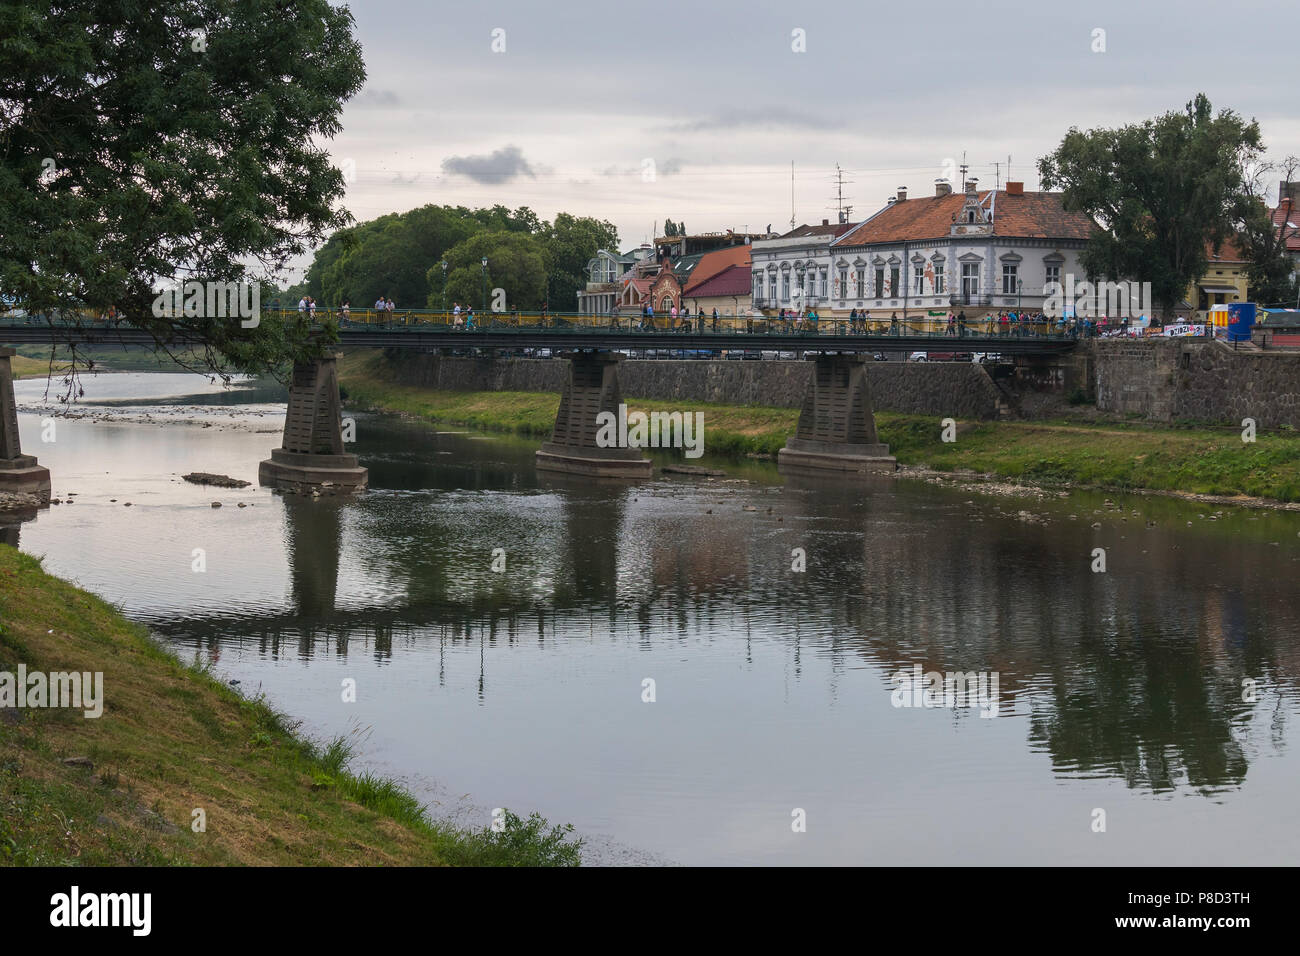 A large pedestrian bridge across the river with many people strolling along it and the embankment. Against the background of houses with ancient archi Stock Photo